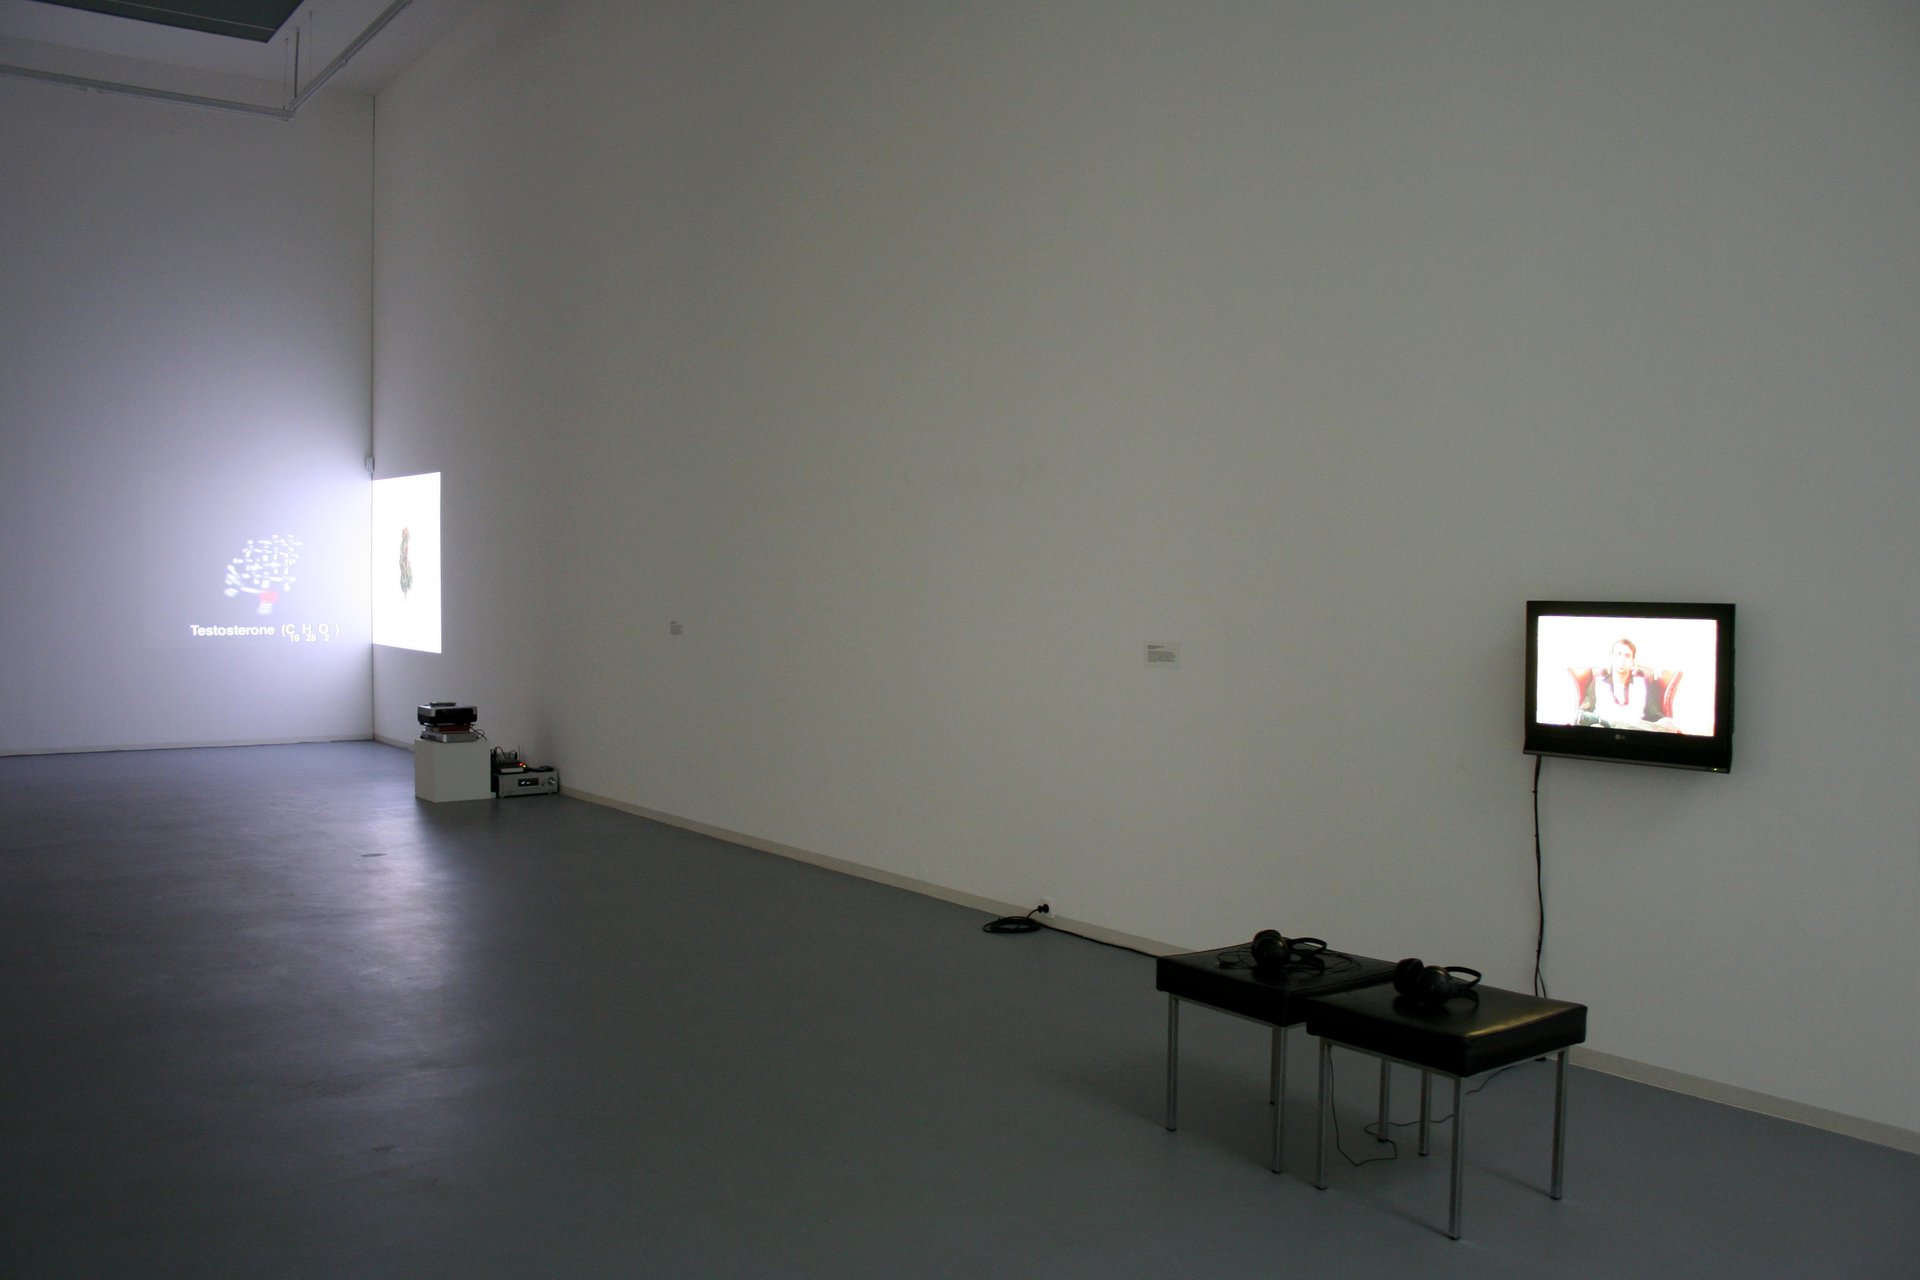 Indicated by signs, Installation view, Bonner Kunstverein, 2009. Photo: n.a.